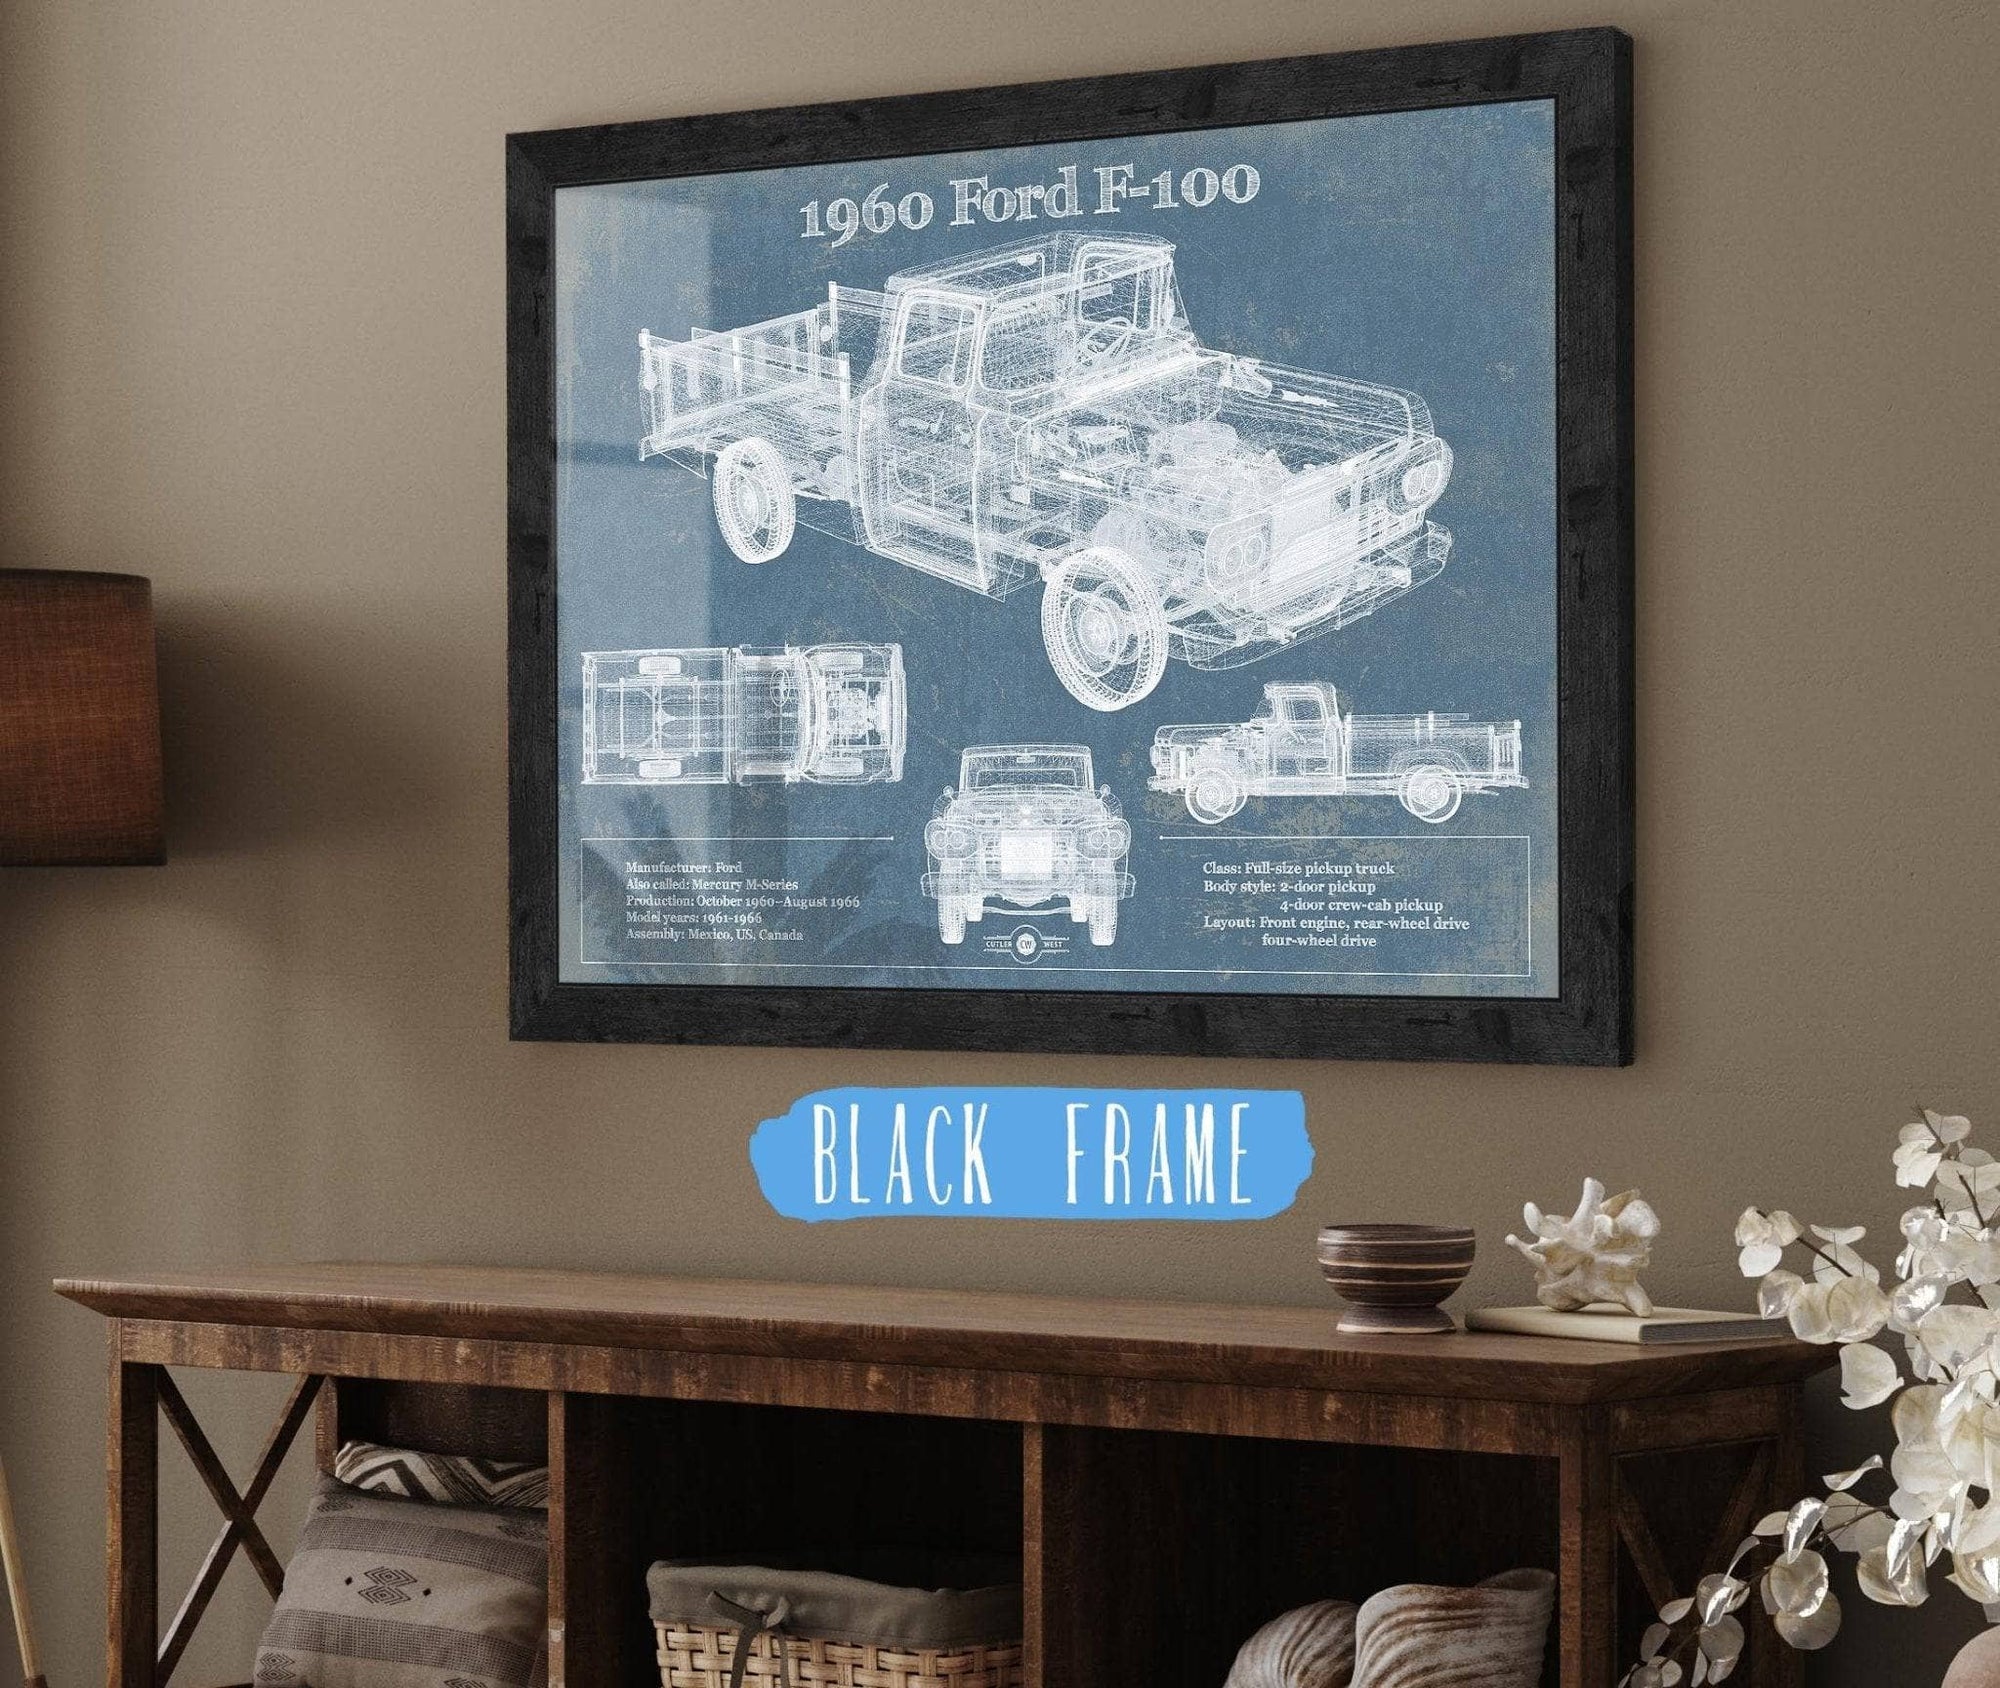 Cutler West Ford Collection 14" x 11" / Black Frame 1960 Ford F-100 Blueprint Vintage Auto Print 933311072_11805